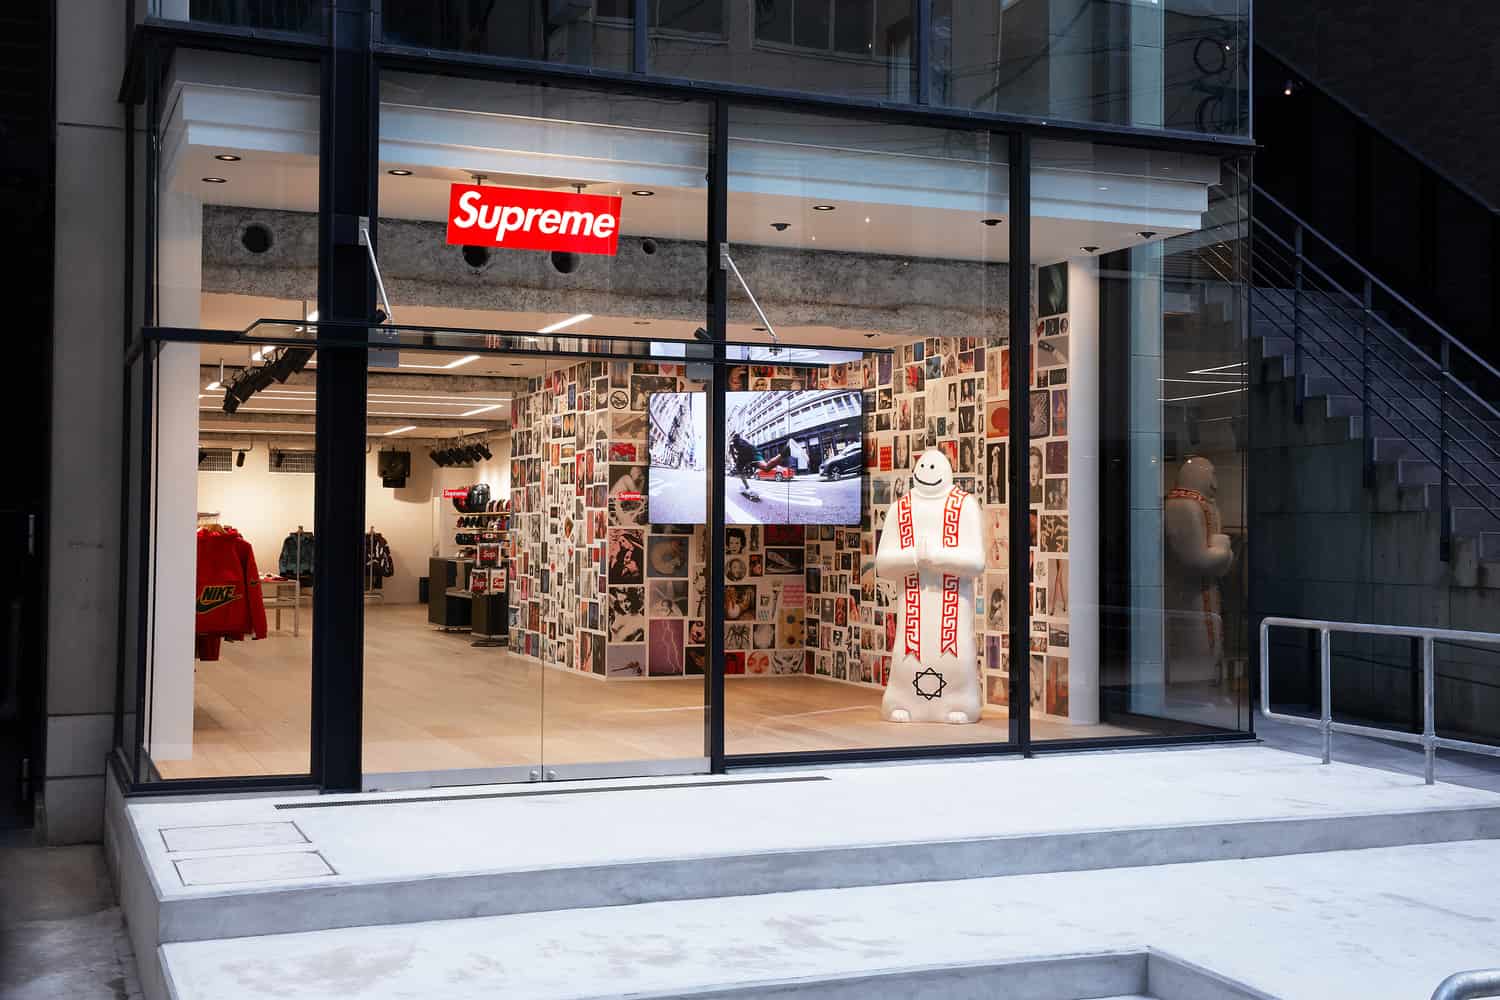 Supreme Has Been Acquired by VF Corp for Over $2.1 Billion